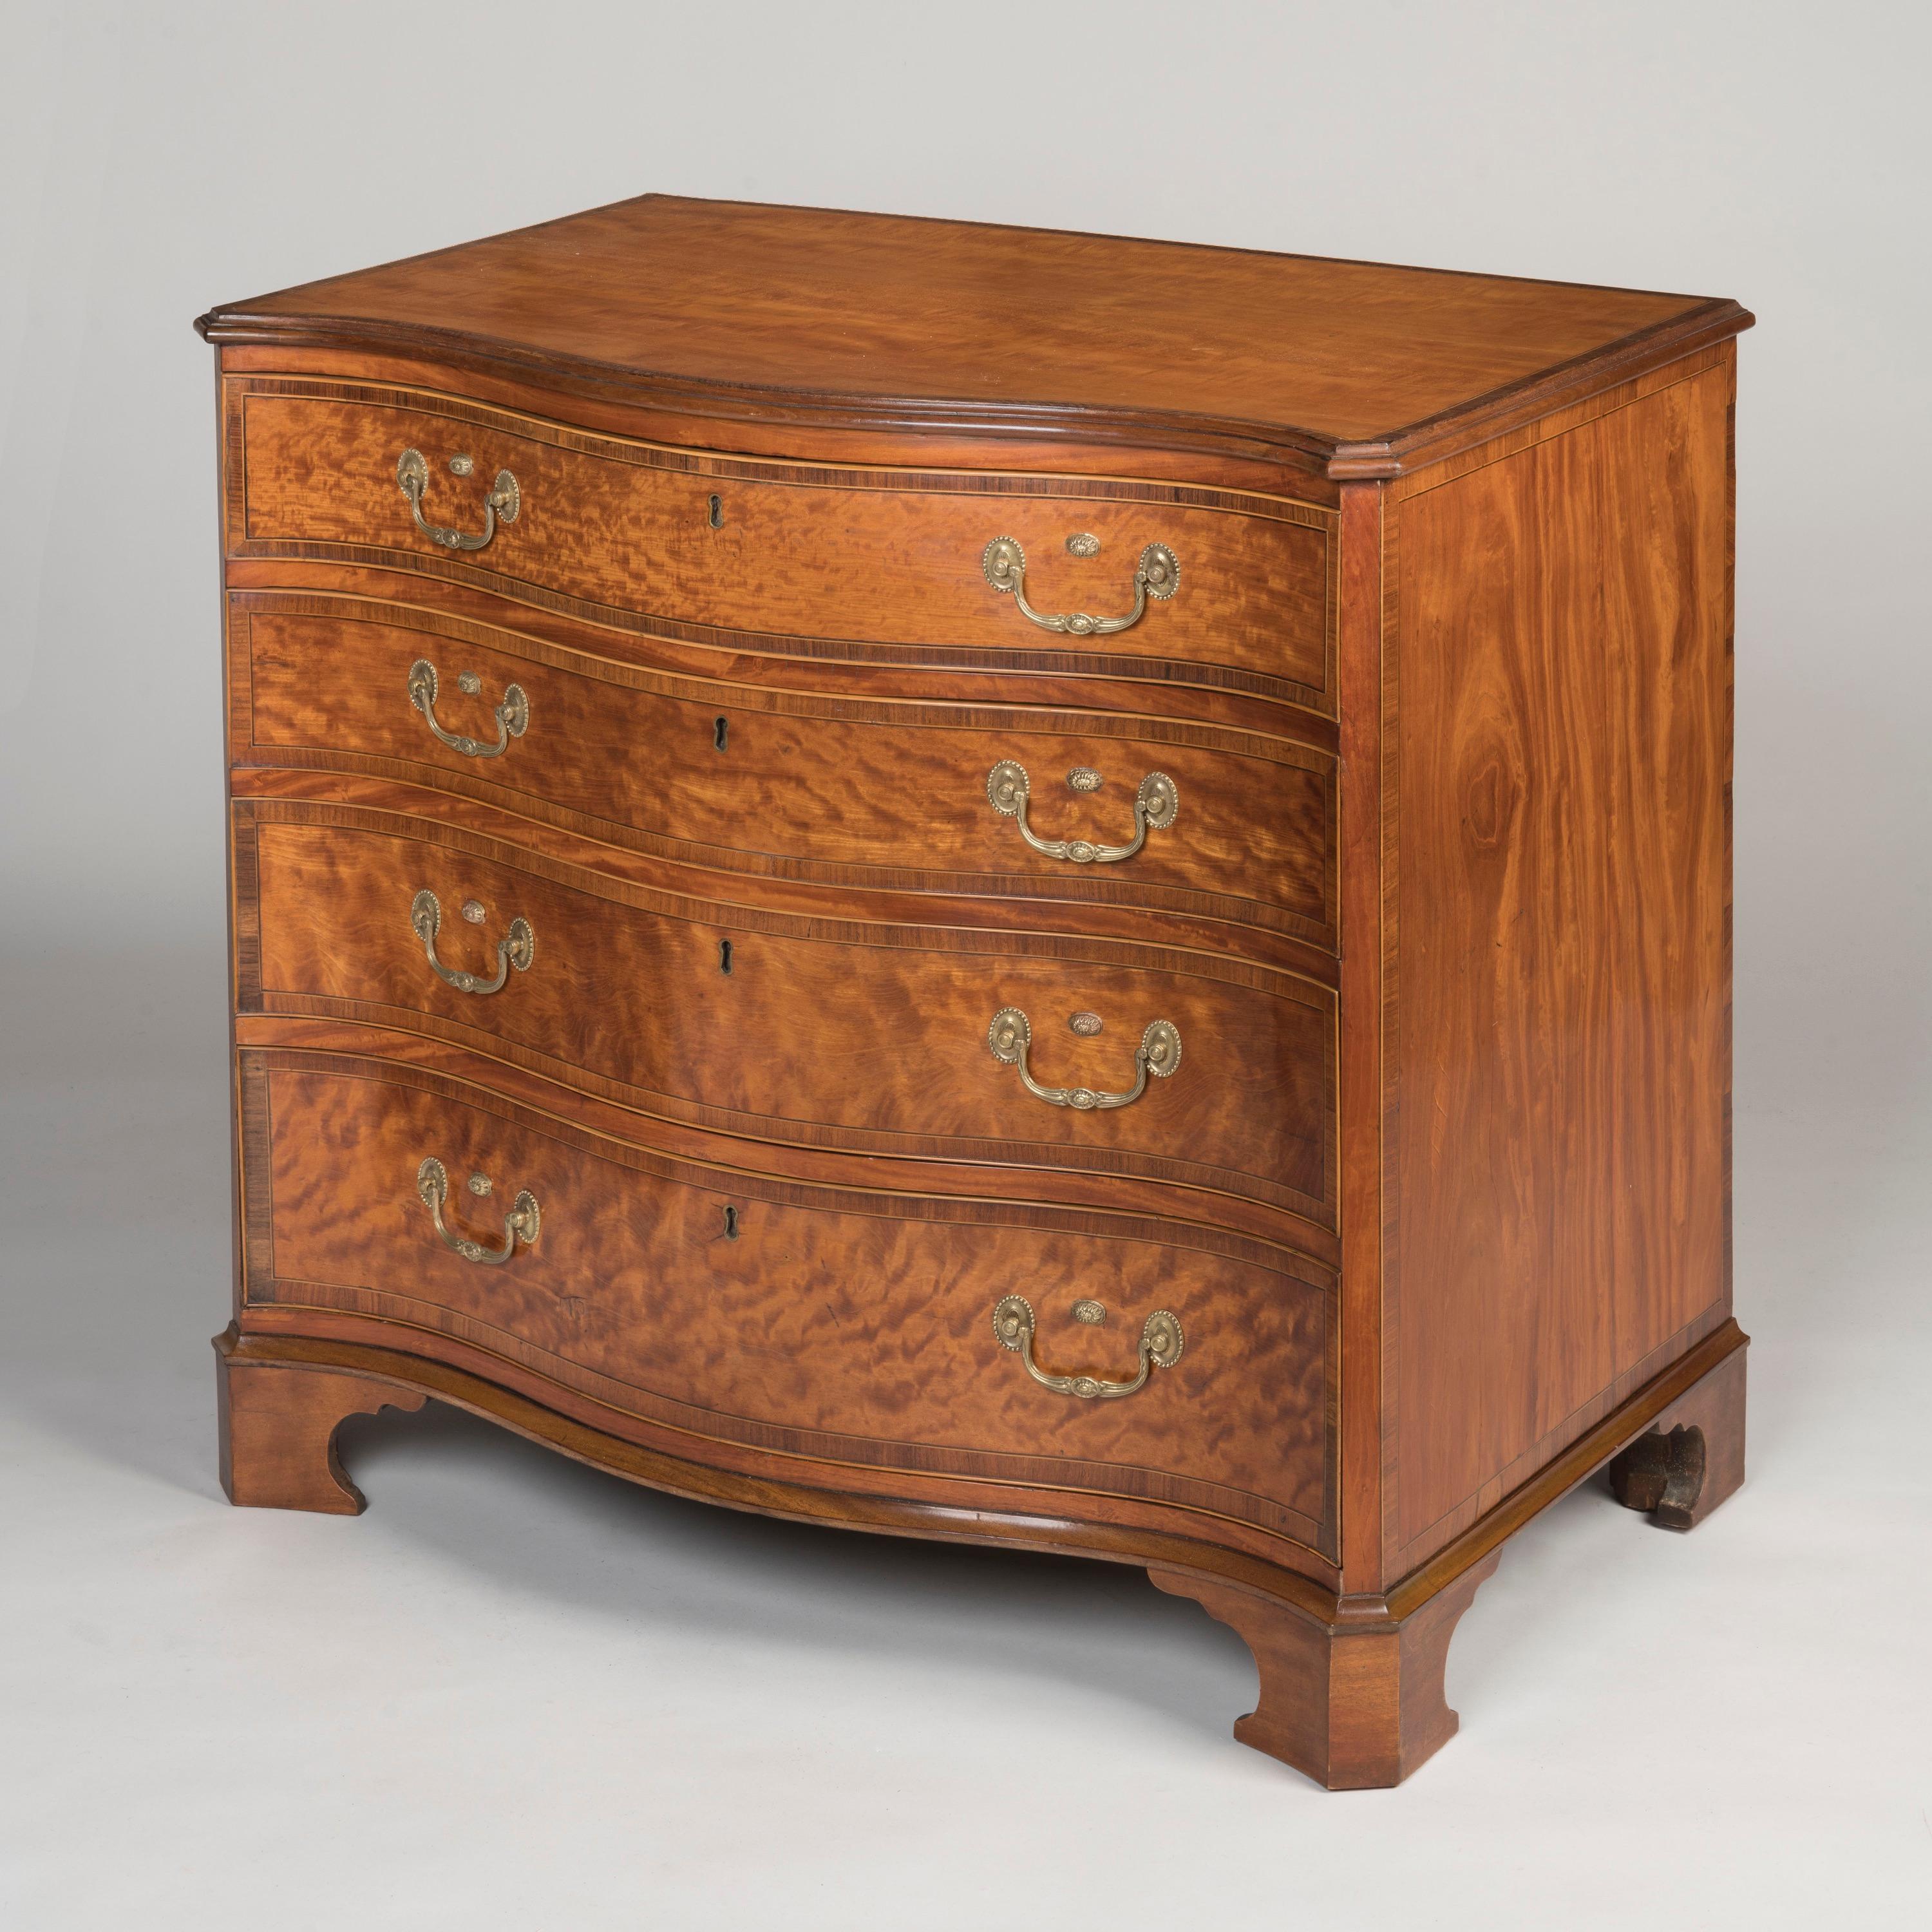 A Fine Satinwood Serpentine Chest of Drawers
Of the George III Period

Constructed in satinwood with rosewood crossbanding, the serpentine chest rising from bracket feet, housing four cock beaded graduated drawers with ebony and boxwood stringing,